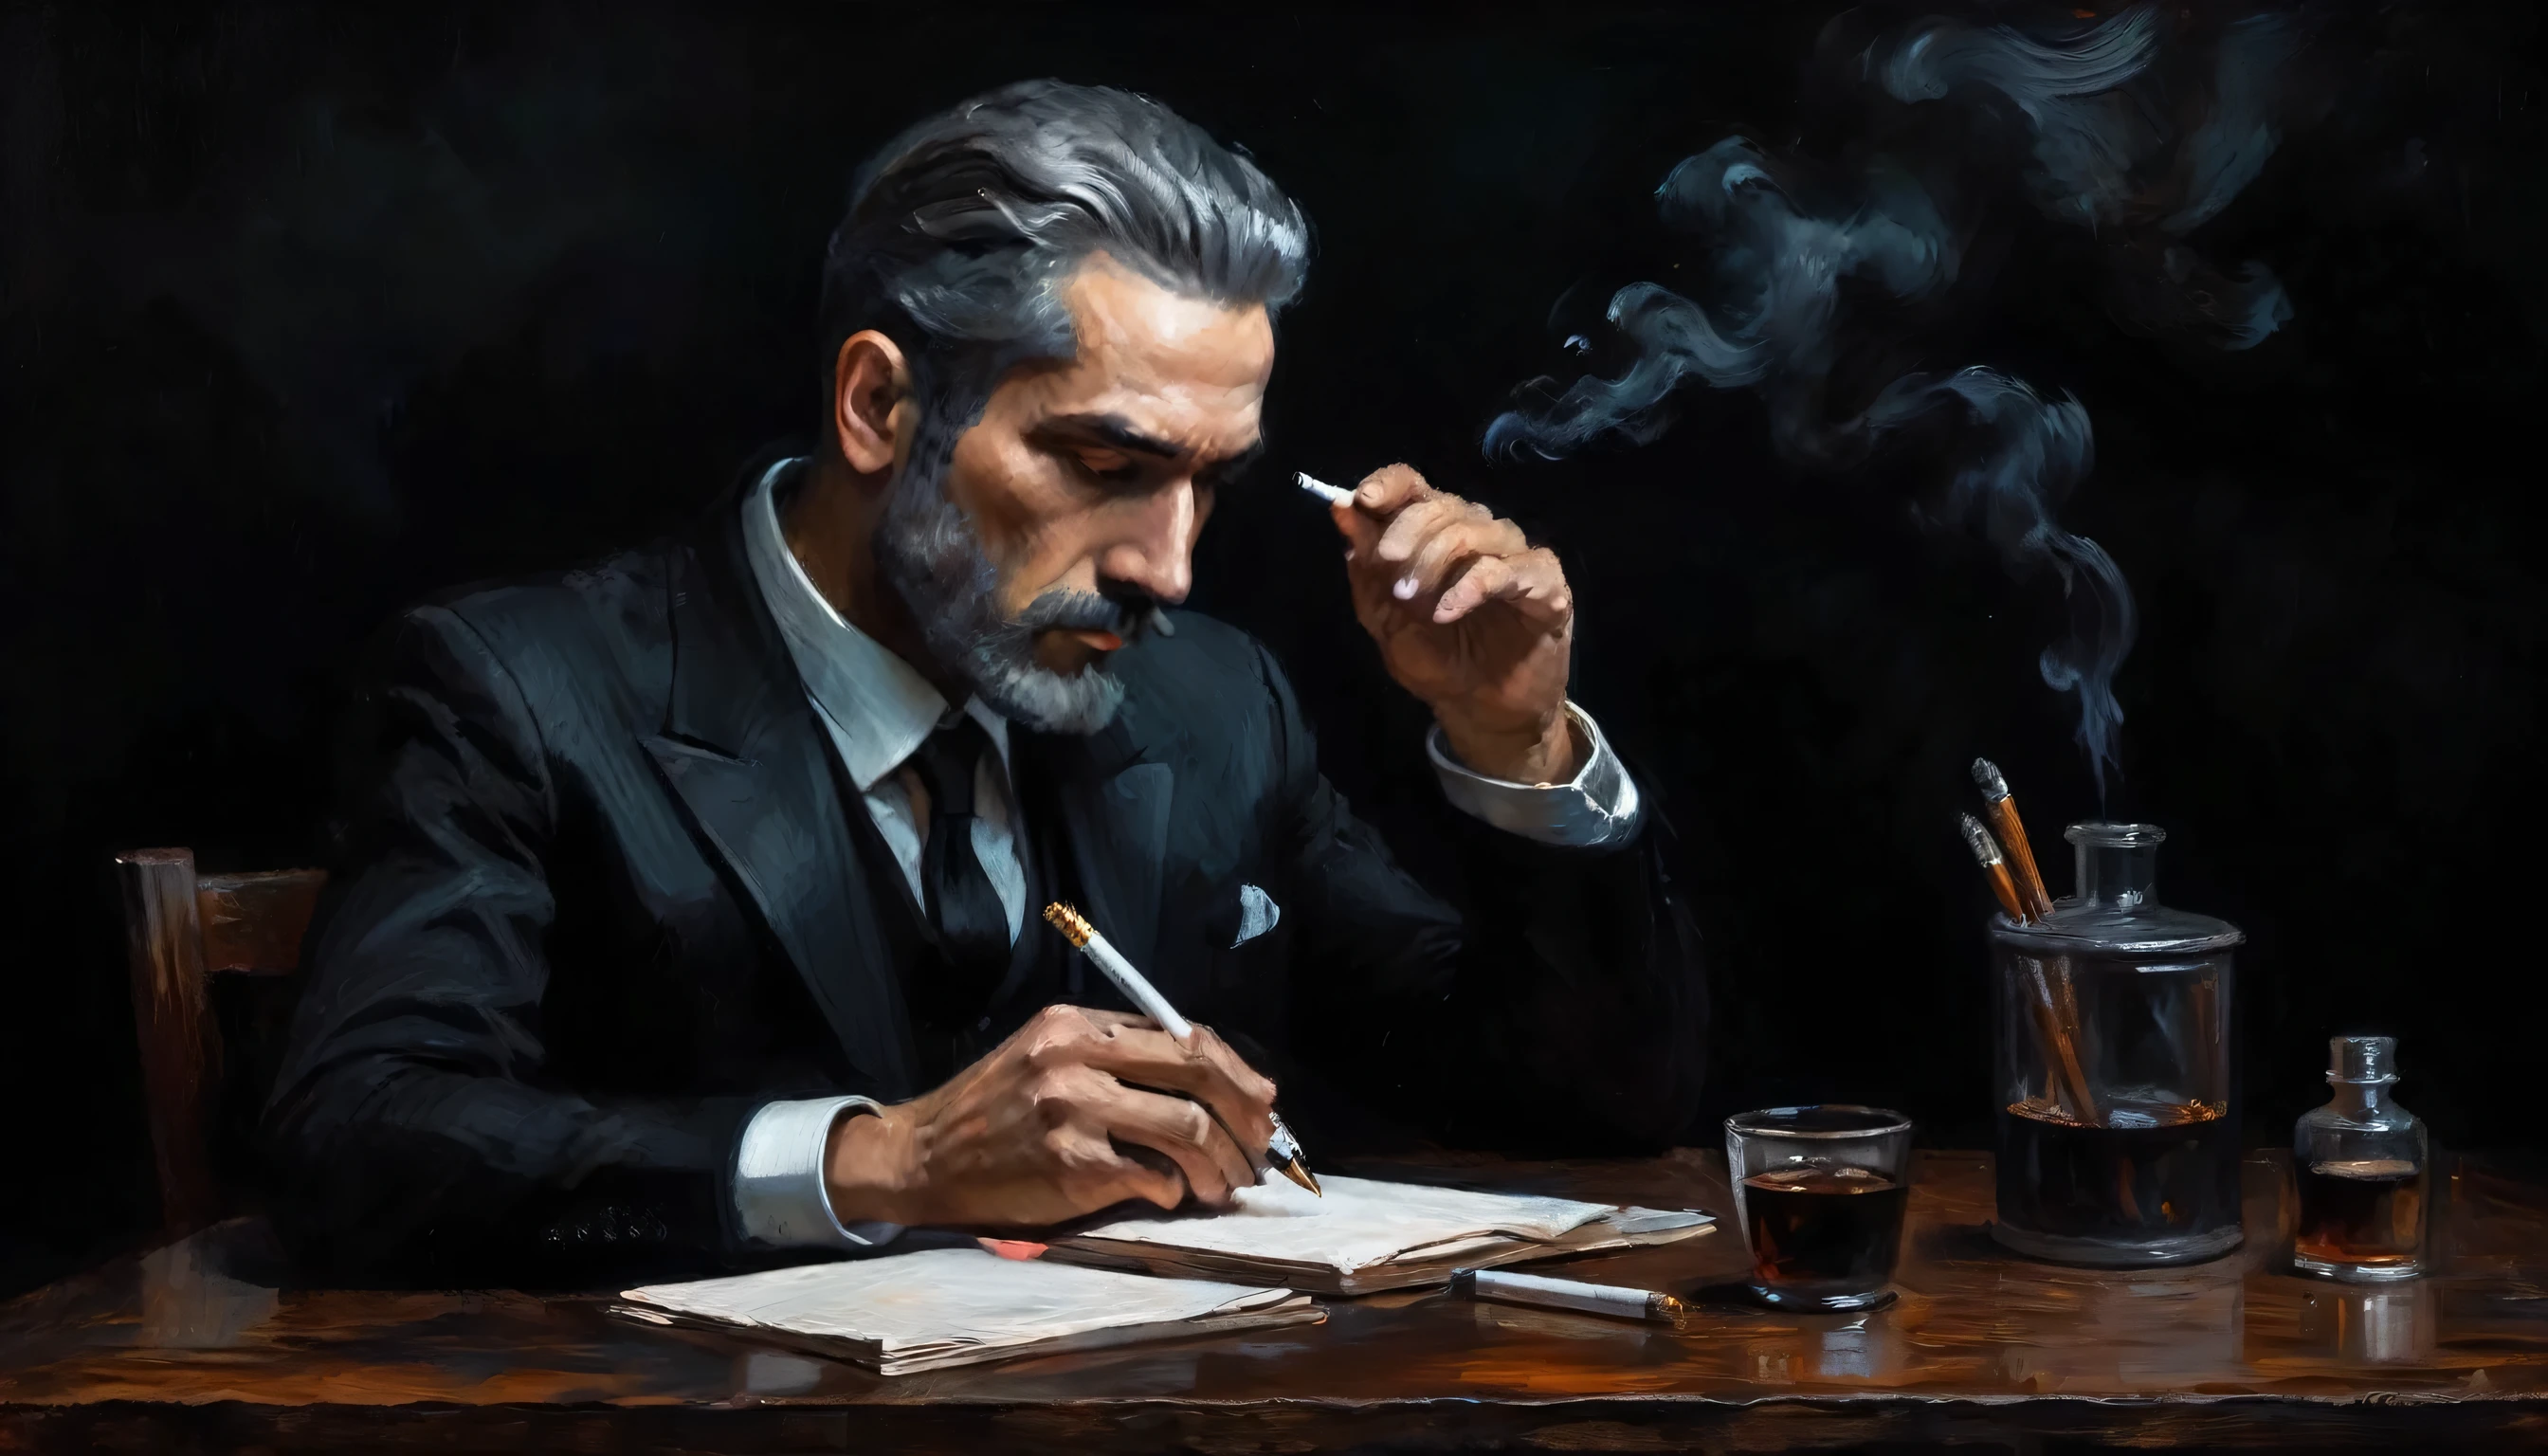 a man, 1 man, smoking a cigarette, 1 cigarette, two hands, writing, holding a pen, perfect fingers, wearing a black suit, positioned in front of a wooden table, black background, melancholic expression, diffuse lighting, suspenseful atmosphere, dark colors, oil painting style, masterpiece